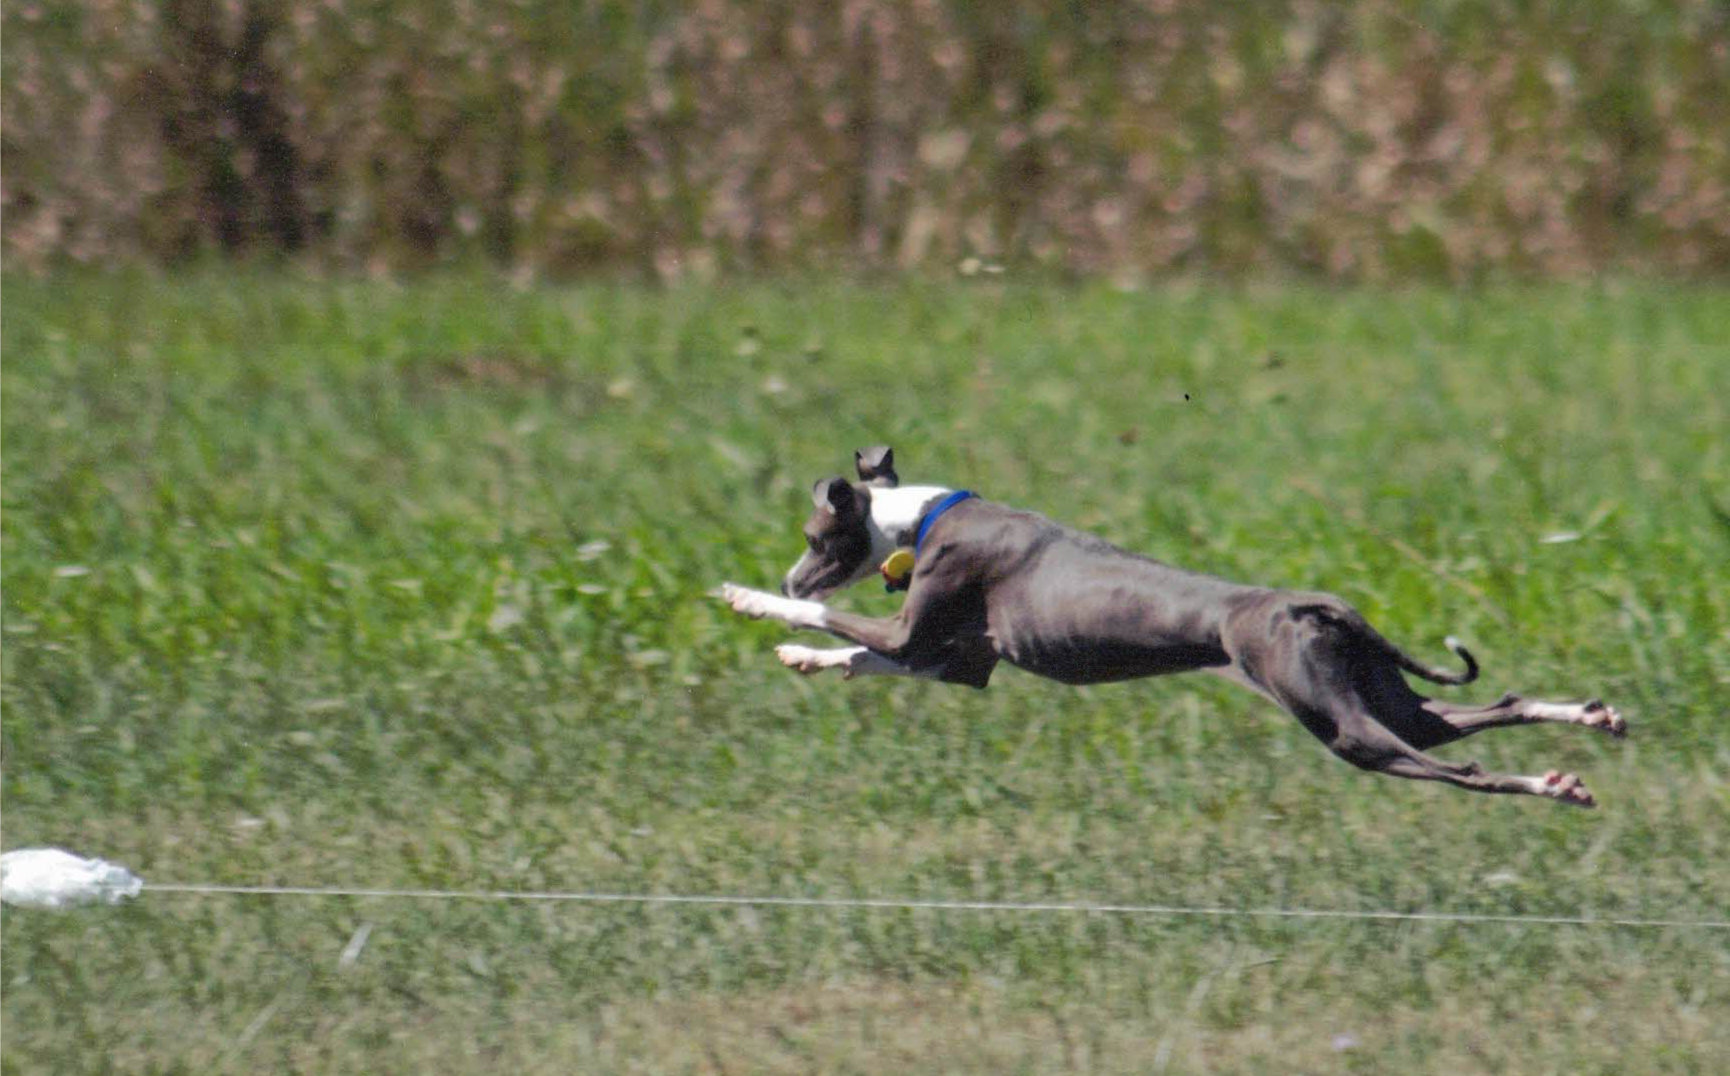 Lure Coursing Your IG - Midwest Italian Greyhound Rescue